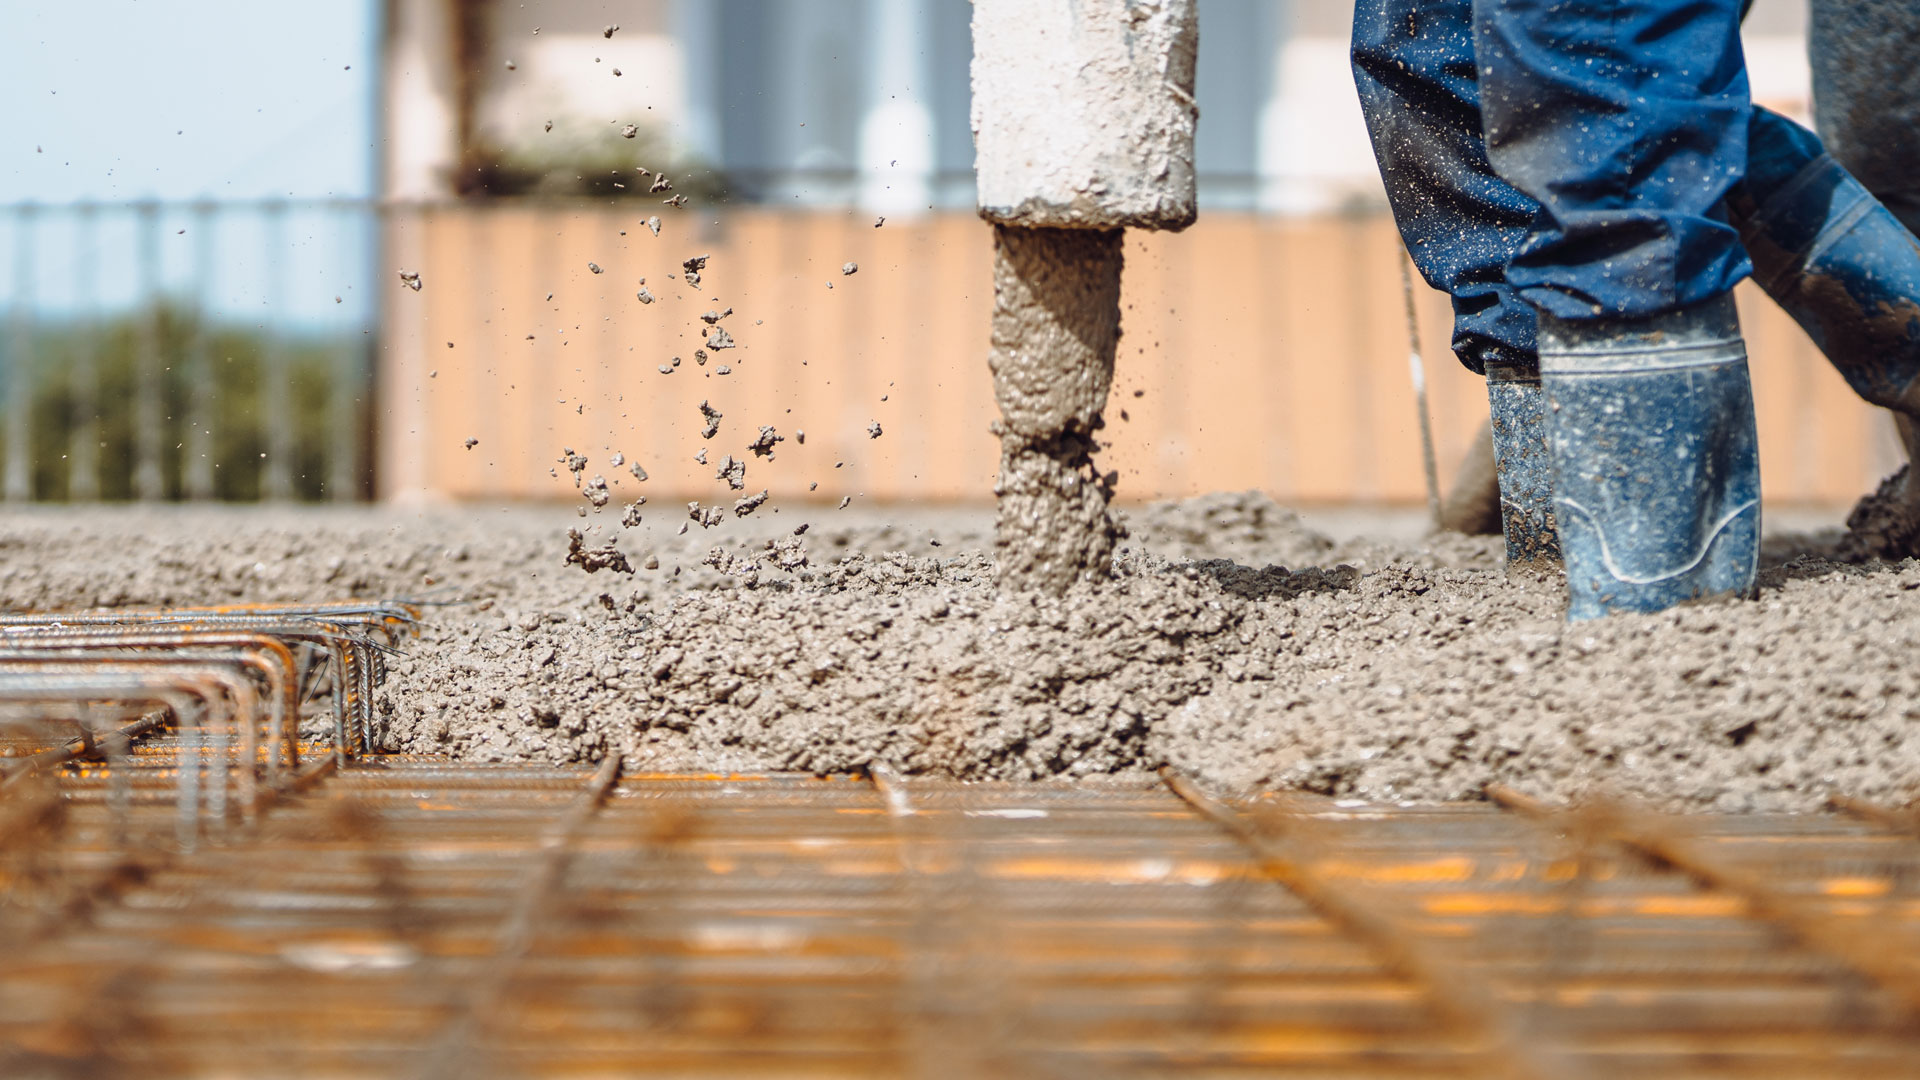 A person is pouring cement into the ground.